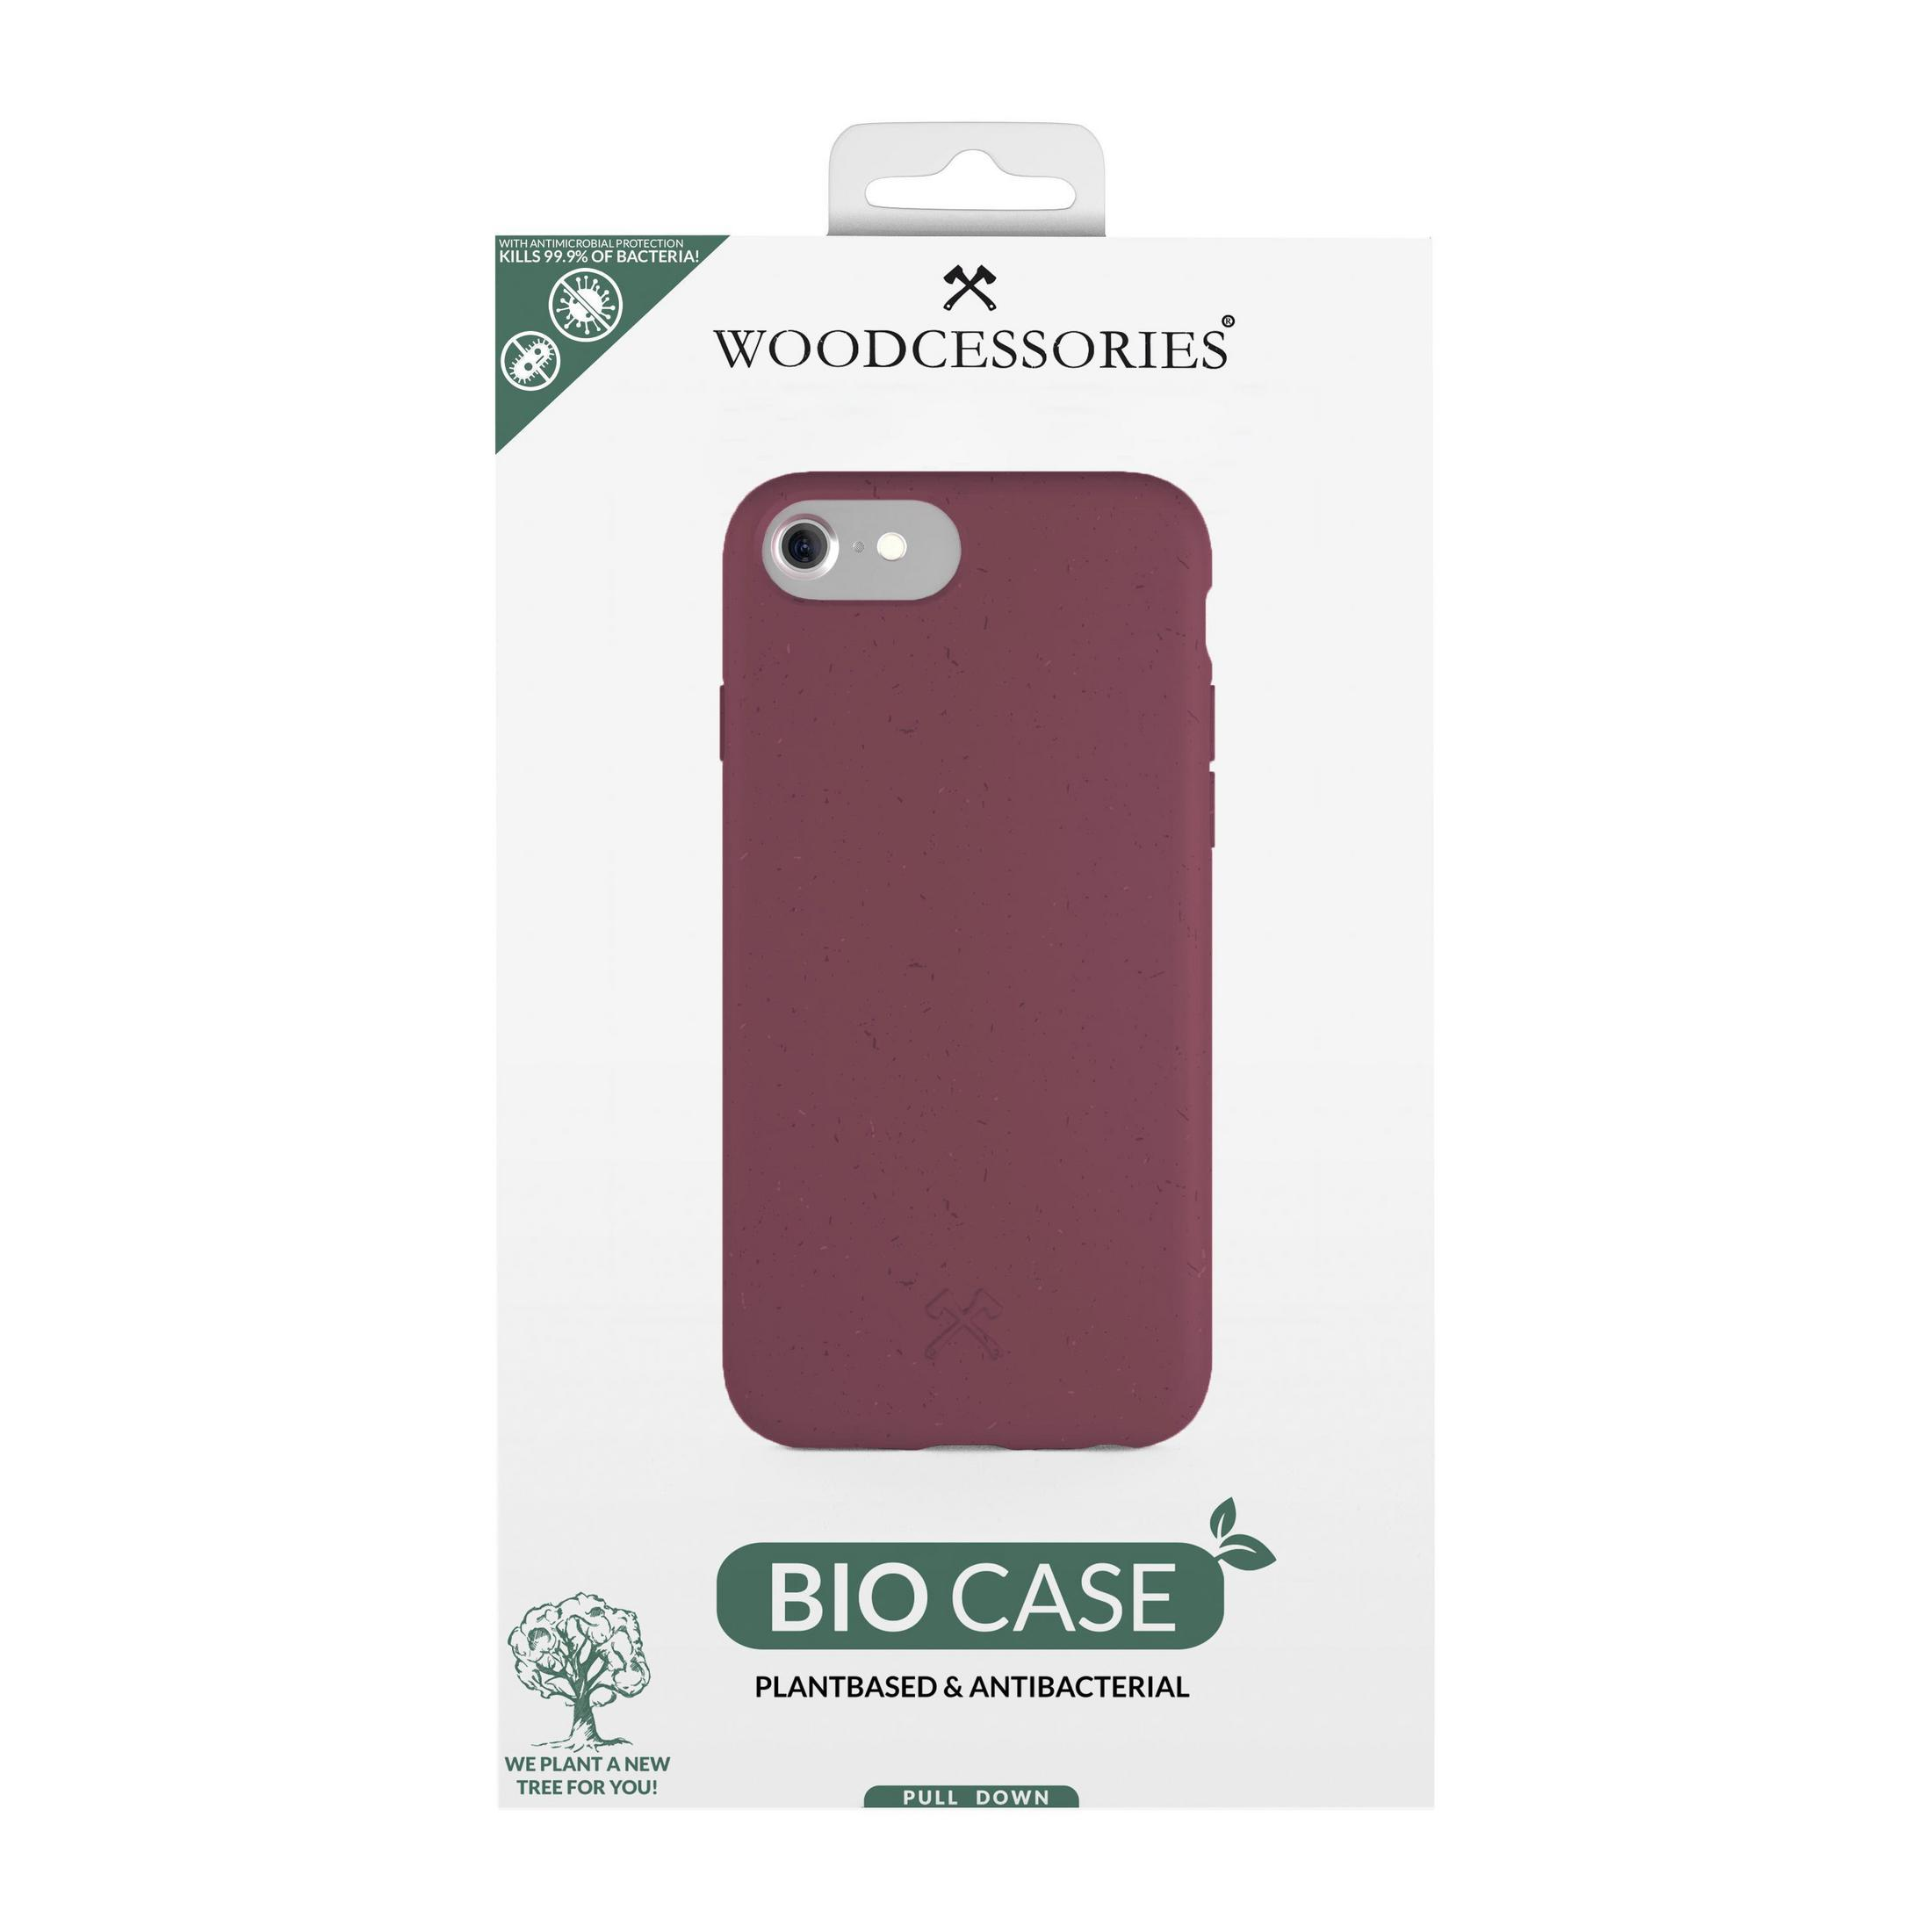 8 BIO SE2 iPhone iPhone Backcover, iPhone Apple, 6 RED, 7 CASE 6, 2020, SE 7, ECO488 WOODCESSORIES CLASSIC IP iPhone 8, Rot